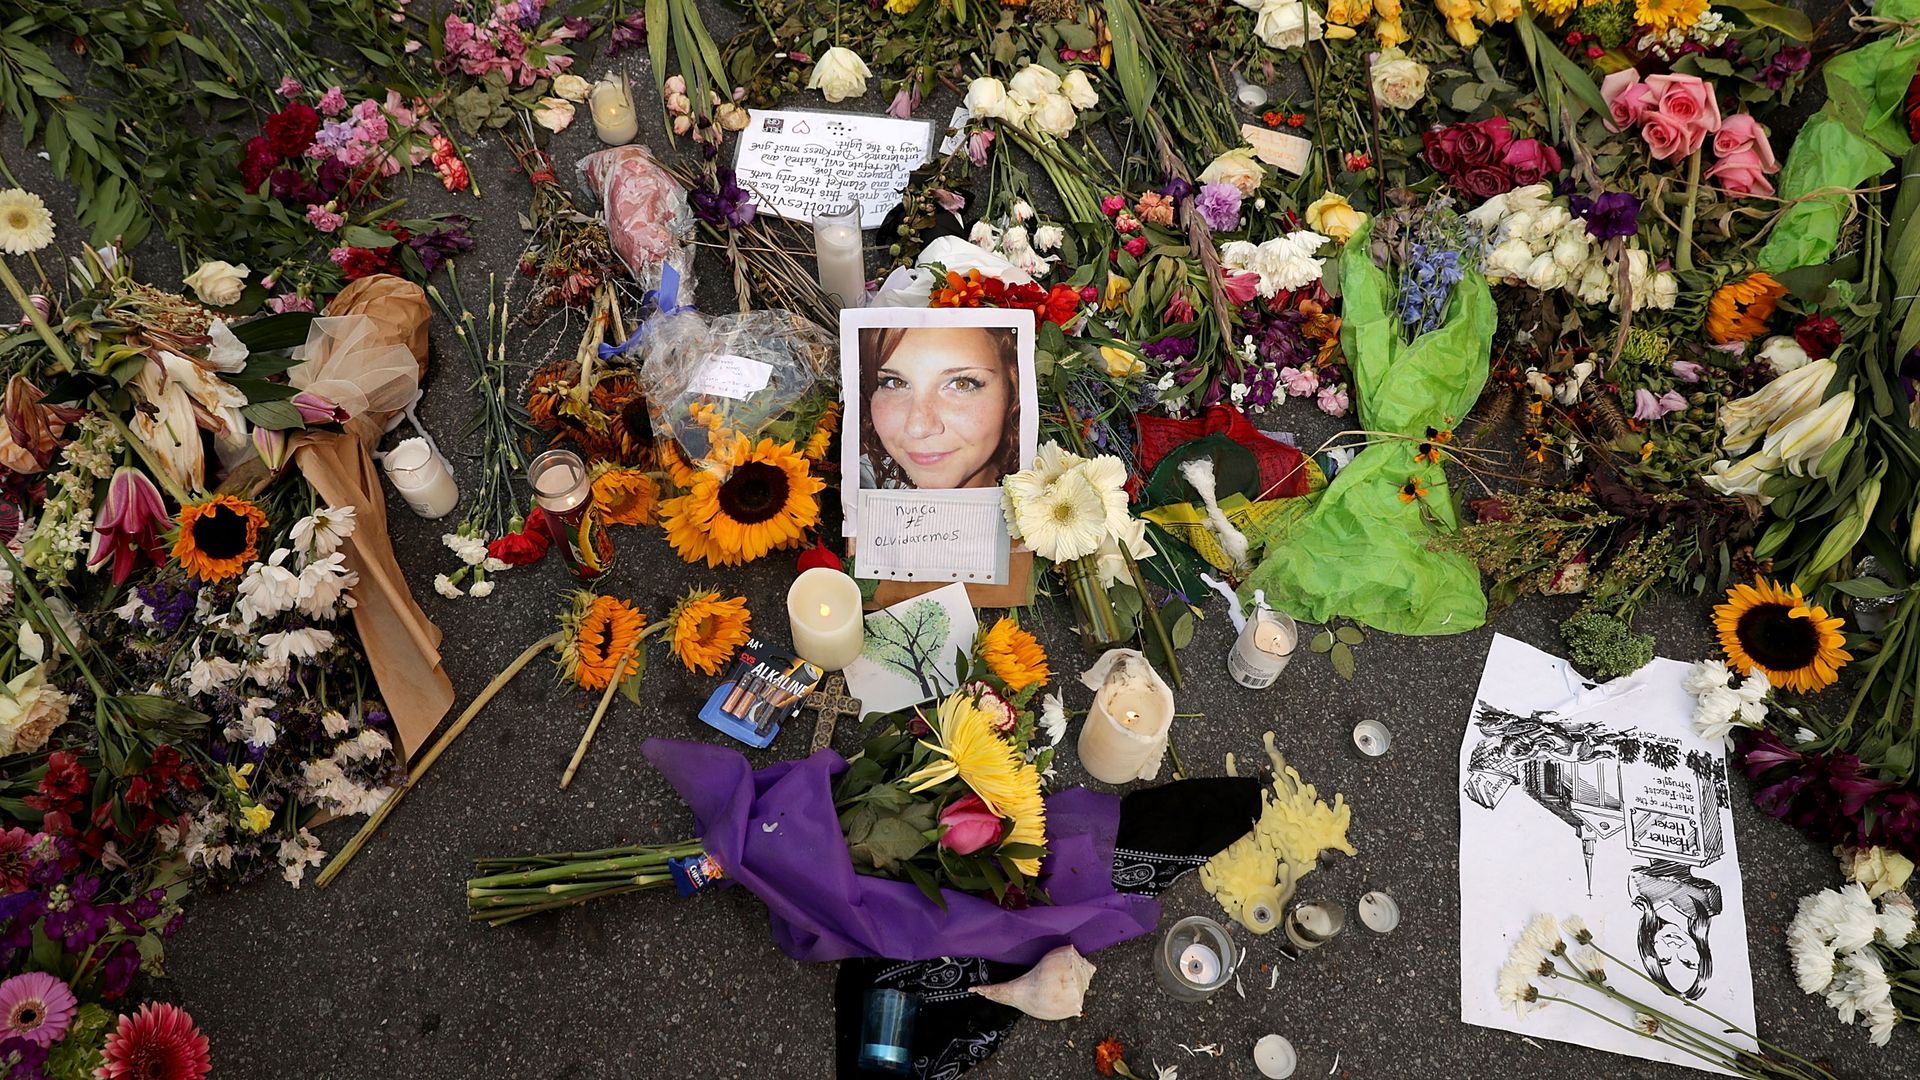  Flowers, candles and chalk-written messages surround a photograph of Heather Heyer on the spot where she was killed and 19 others injured.